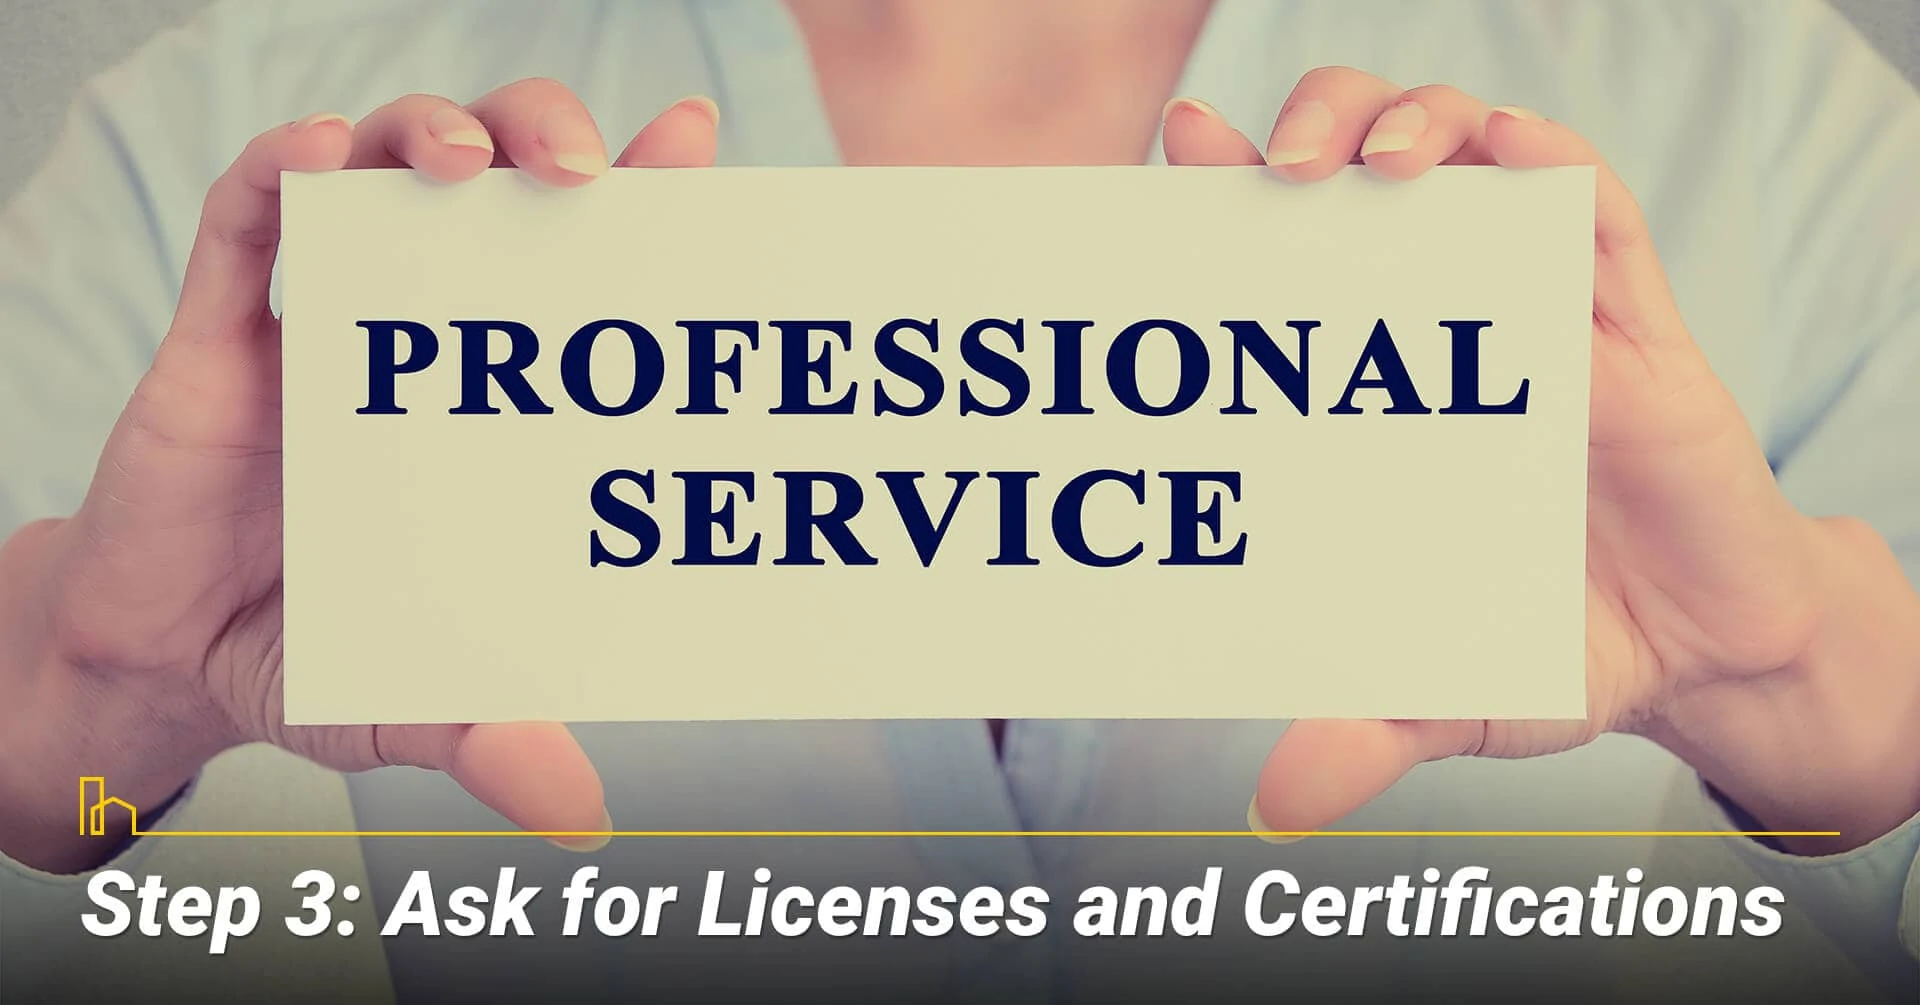 Step 3: Ask for Licenses and Certifications, ask for appropriate documentations